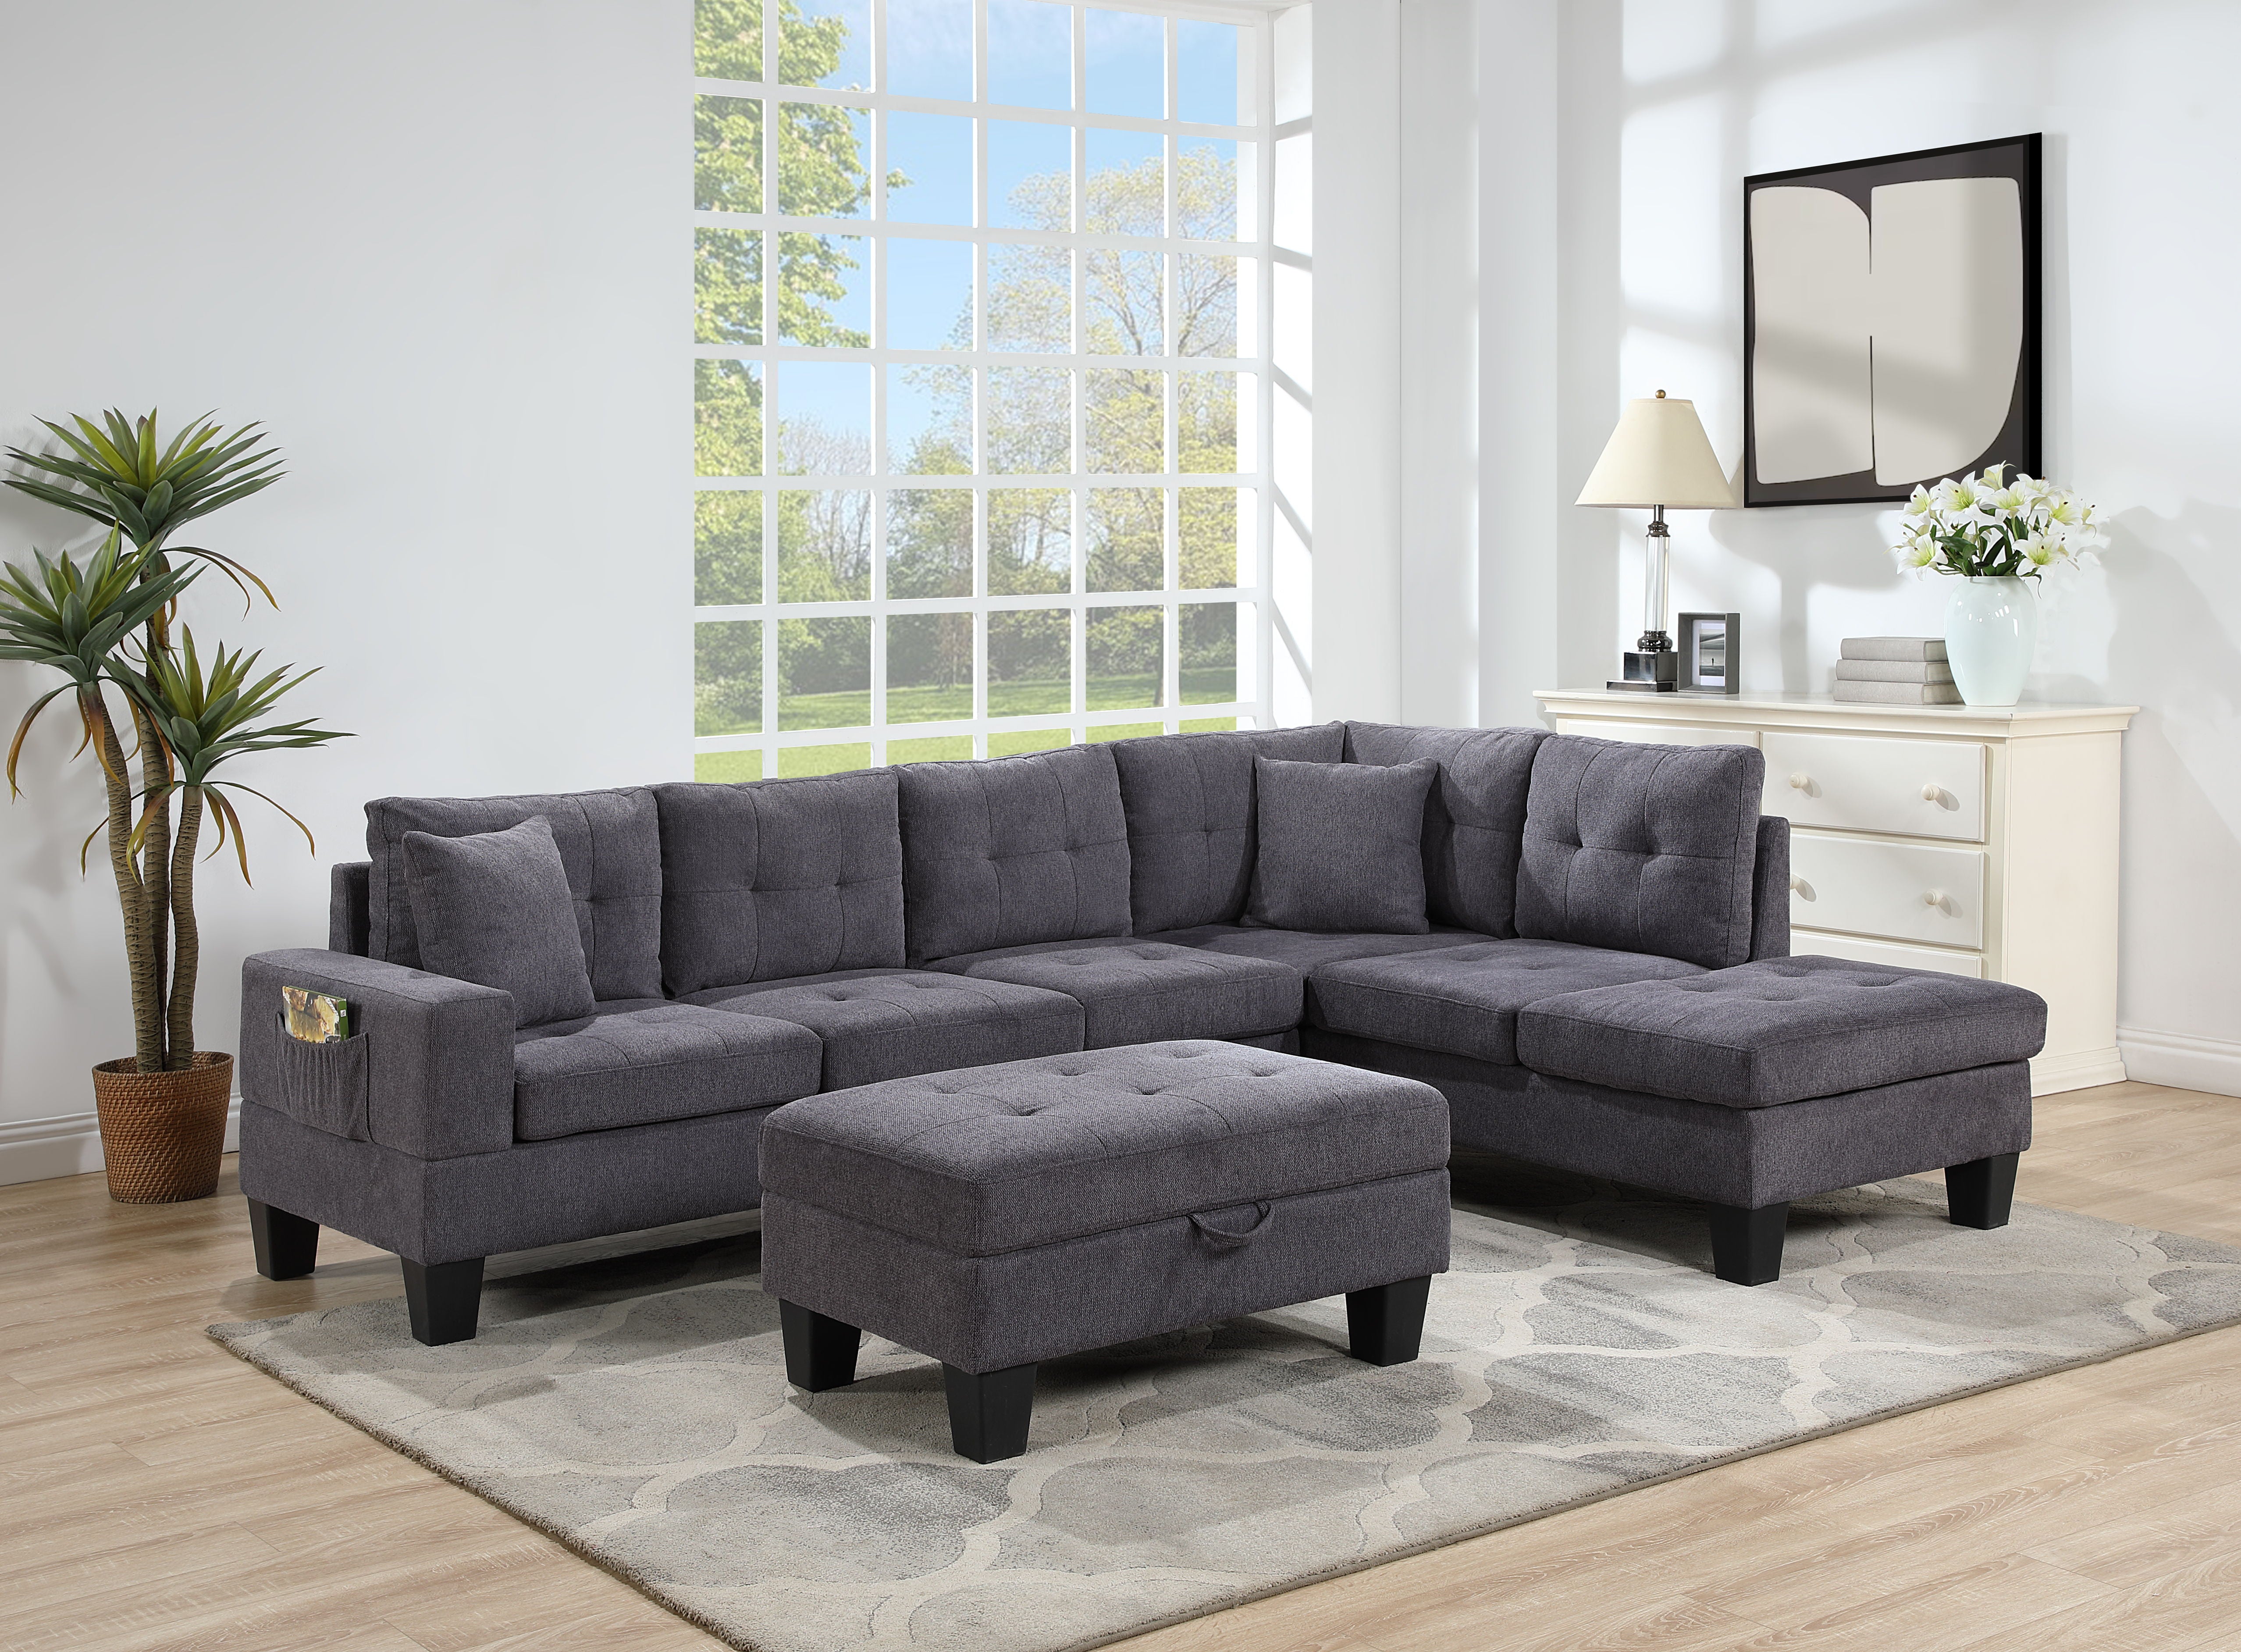 Briscoe - Wide Woven Fabric Reversible Sectional Sofa With Dropdown Table, Charging Ports, Cupholders, Storage Ottoman, And Pillows - Dark Gray